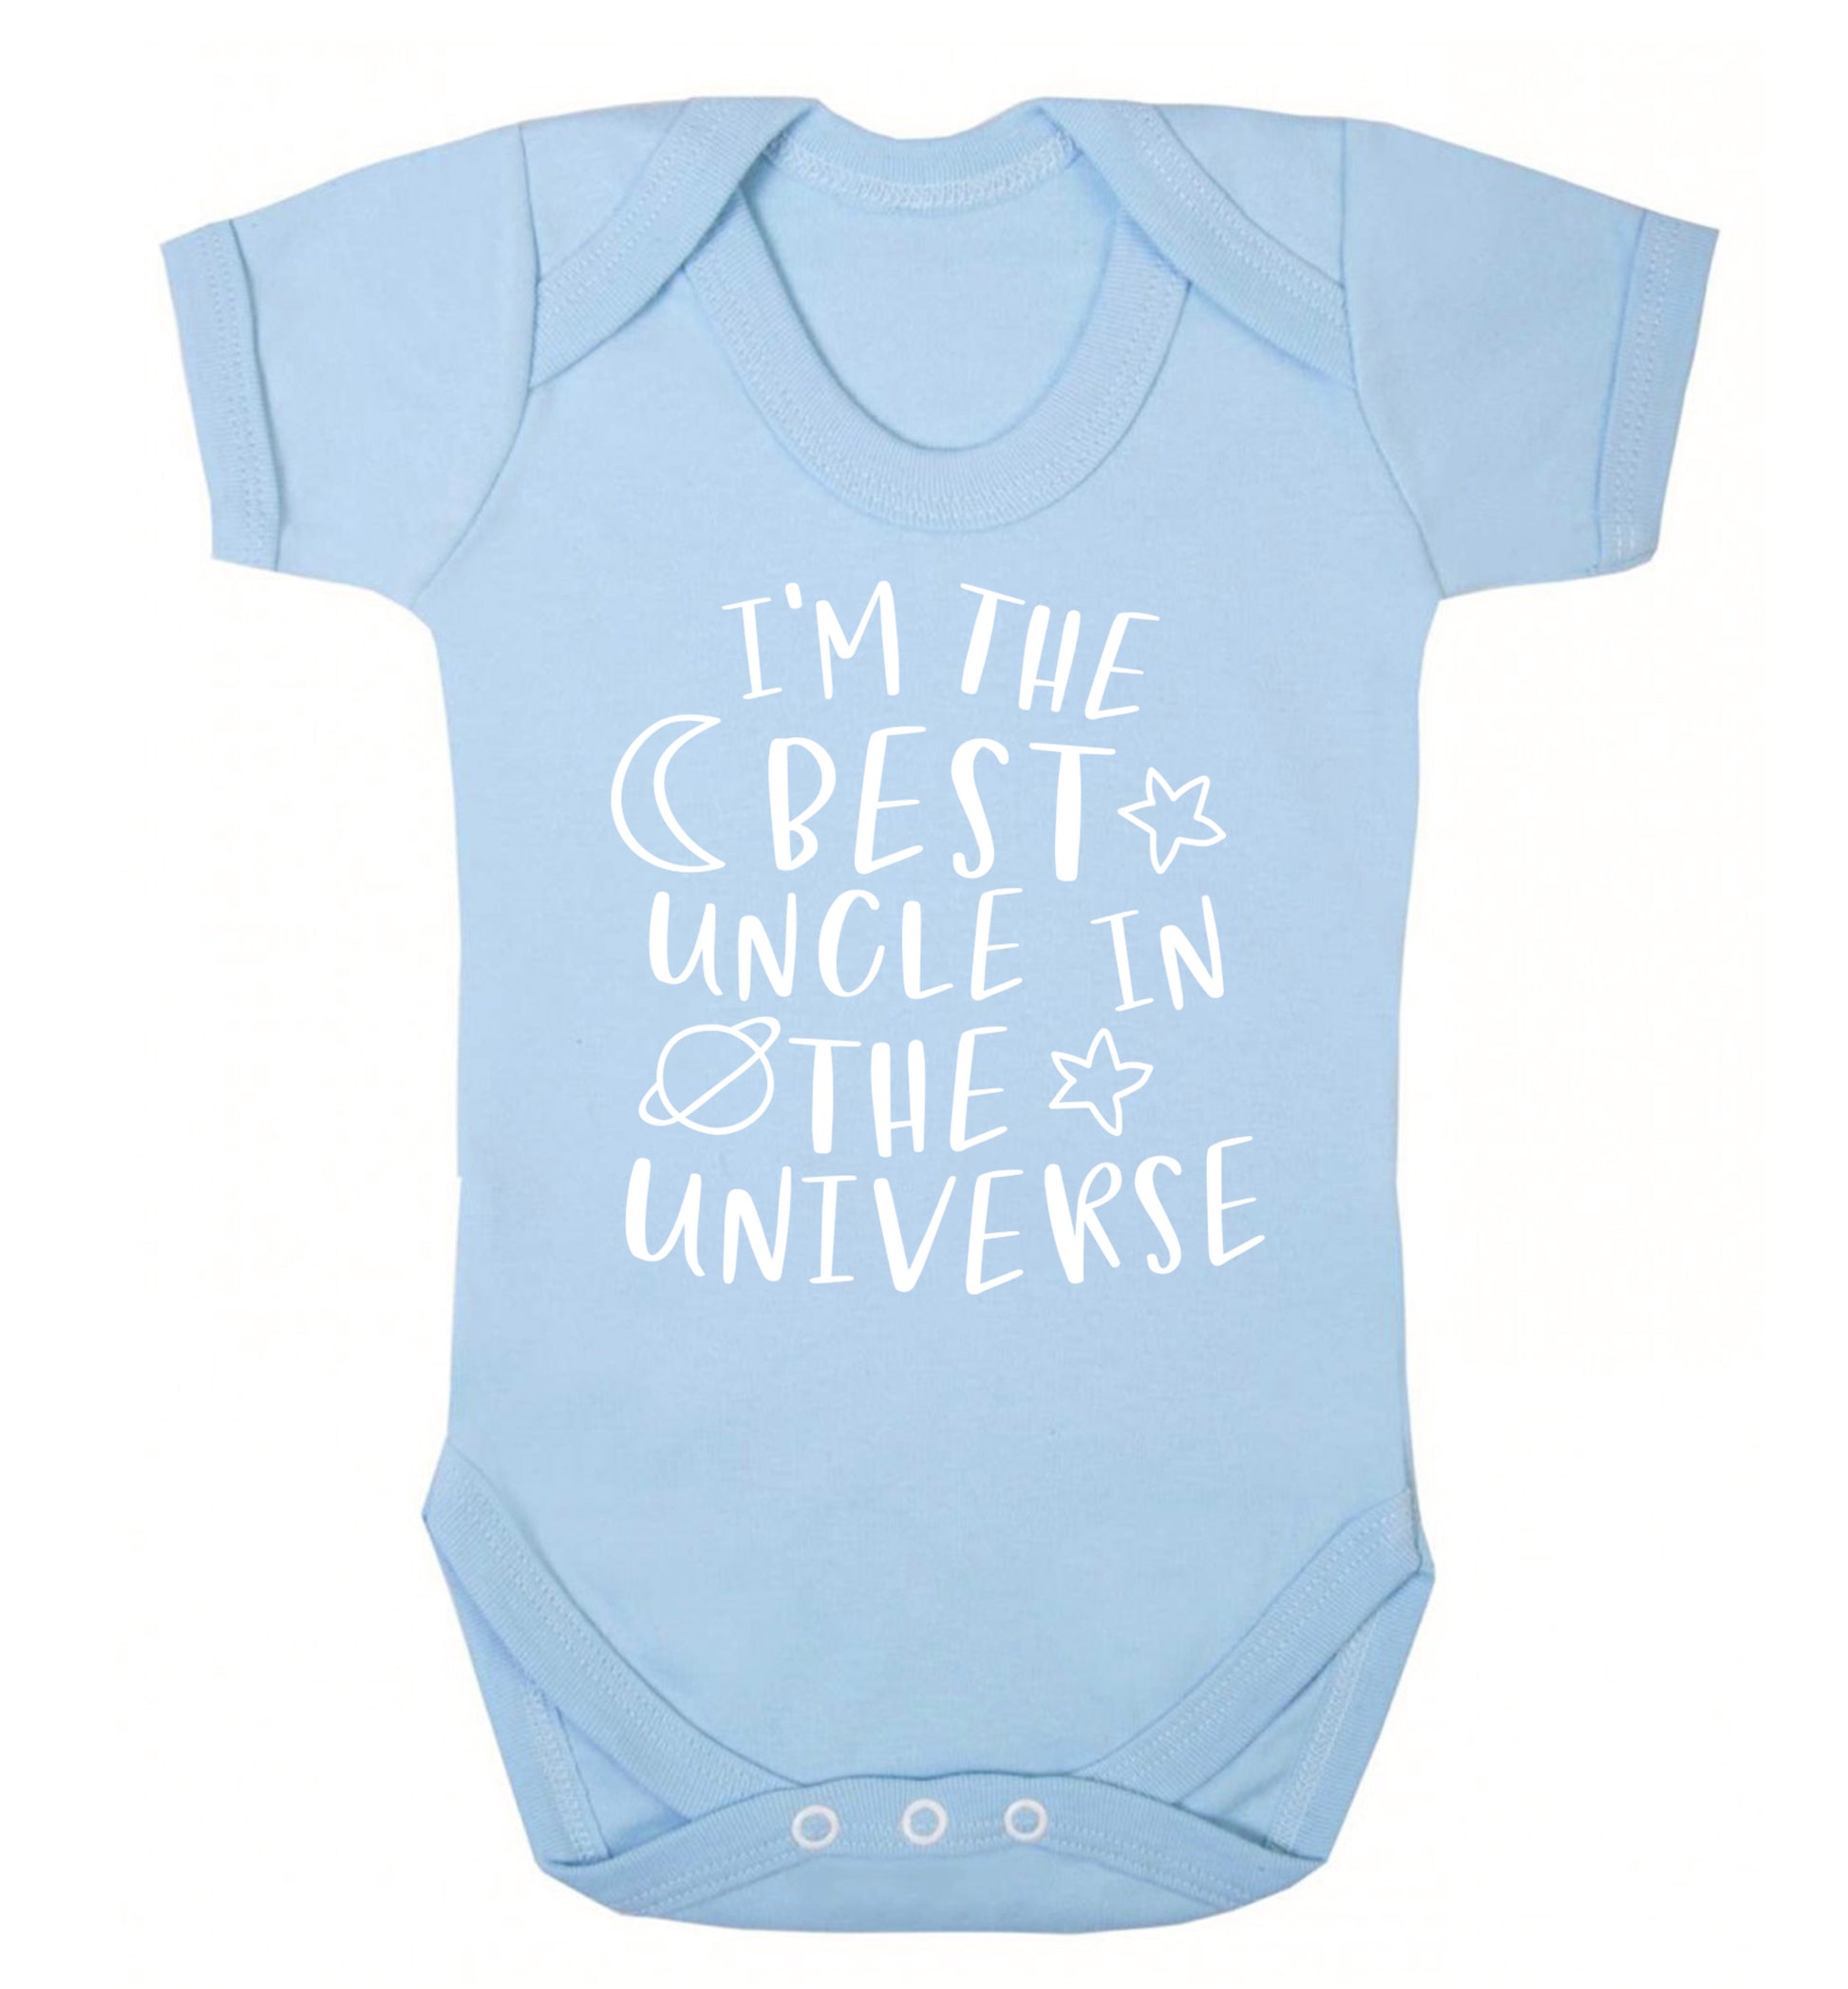 I'm the best uncle in the universe Baby Vest pale blue 18-24 months